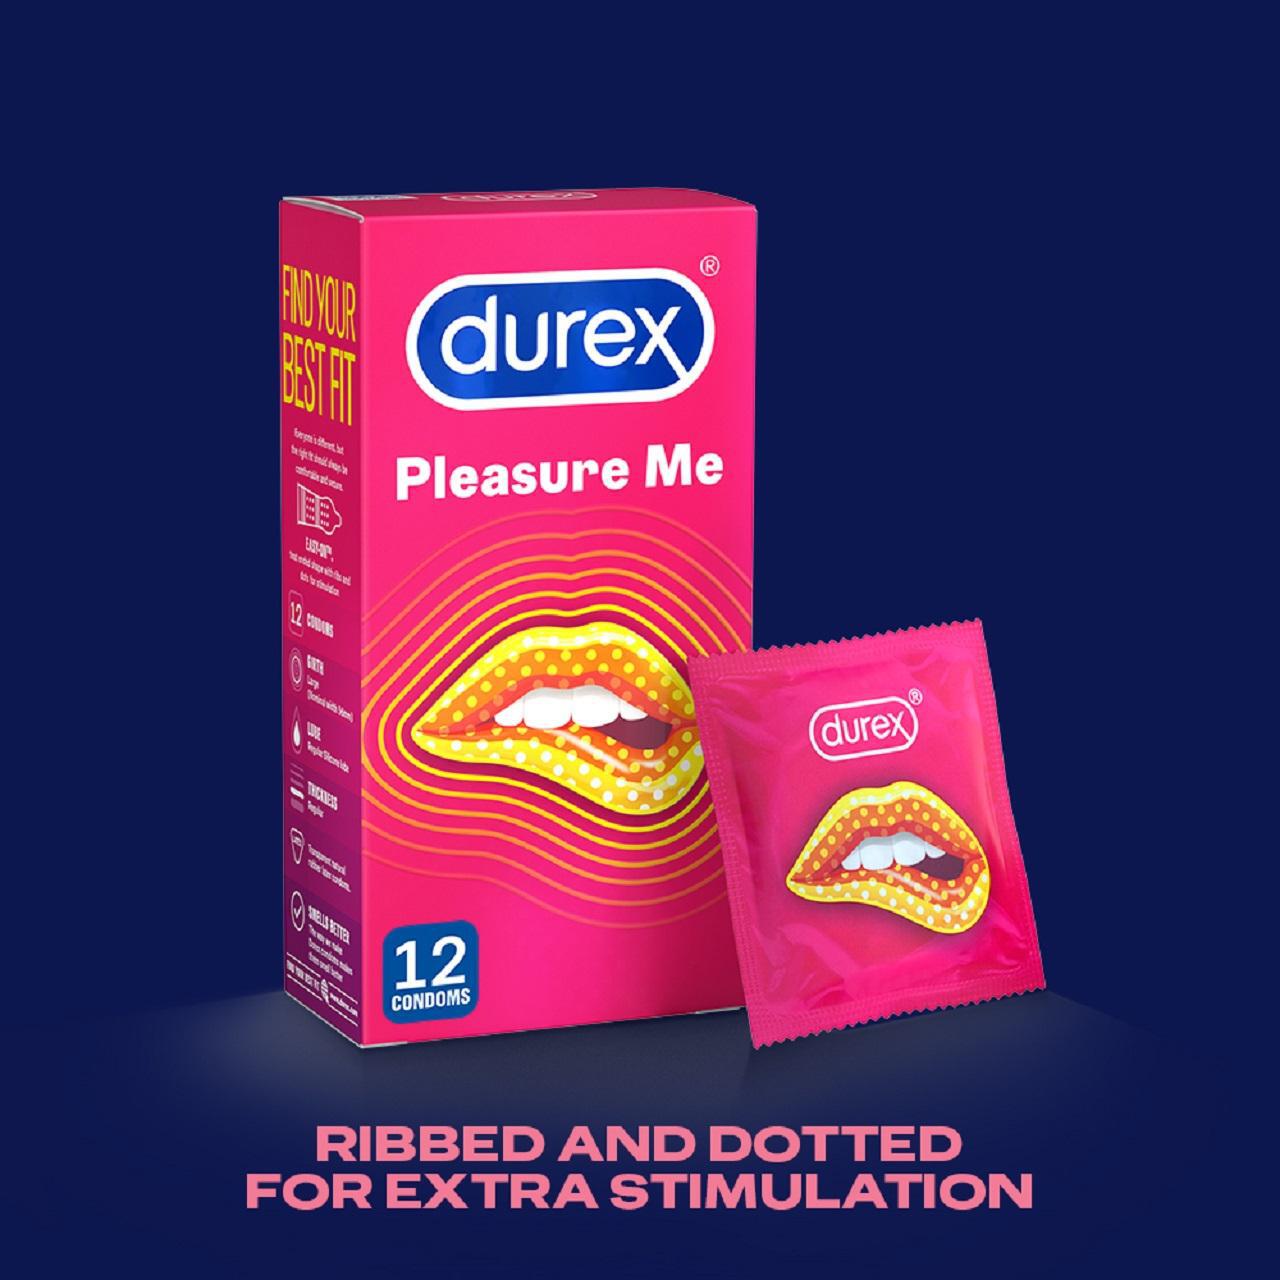 Durex Pleasure Me Ribbed and Dotted 12 Condoms 12 per pack